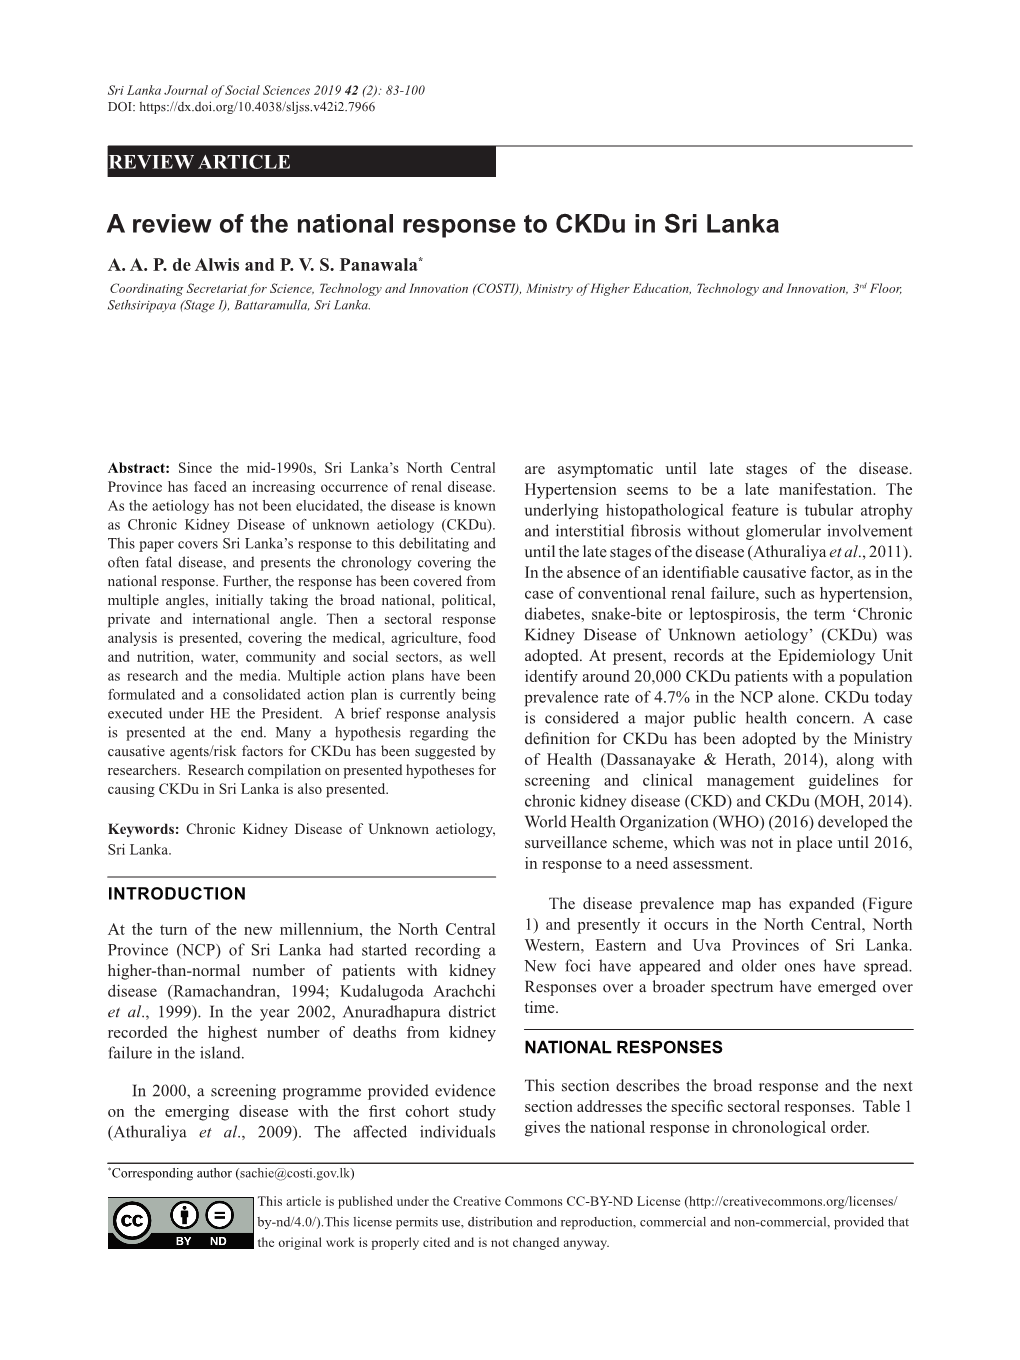 A Review of the National Response to Ckdu in Sri Lanka A